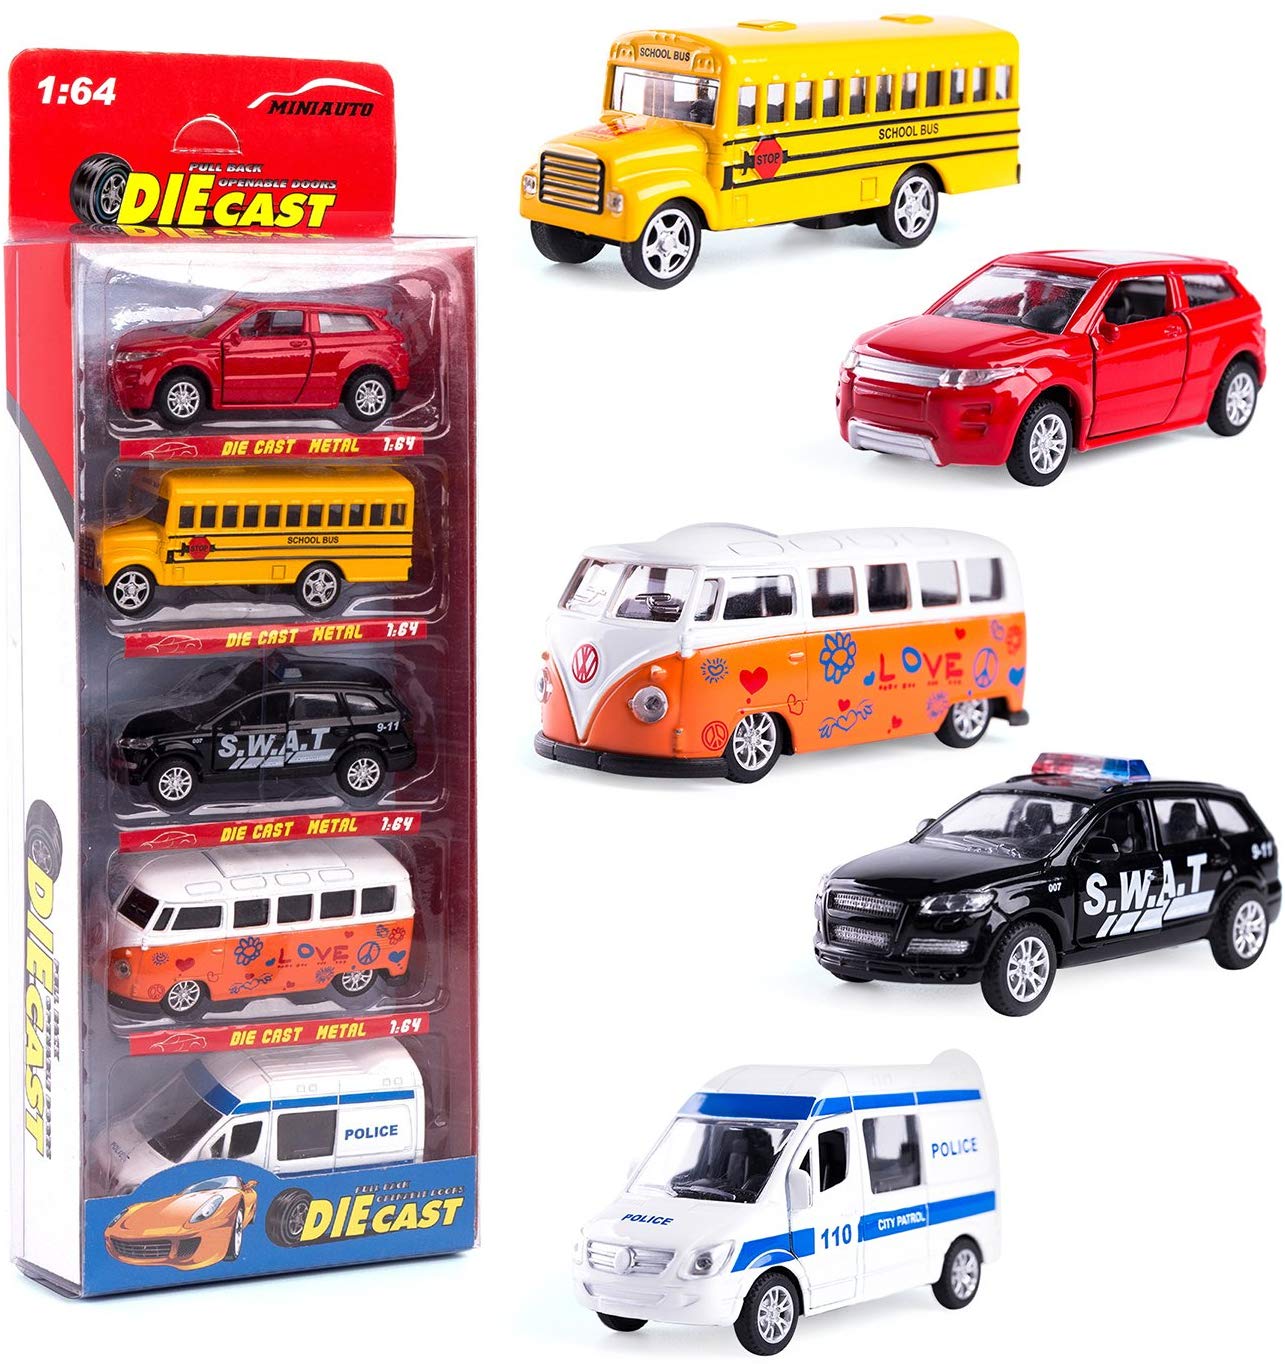 Openable Doors Pull Back Cars Ambulance Official Car Ⅱ KIDAMI Die-cast Metal Toy Cars Set of 5 Gift Pack for Kids 